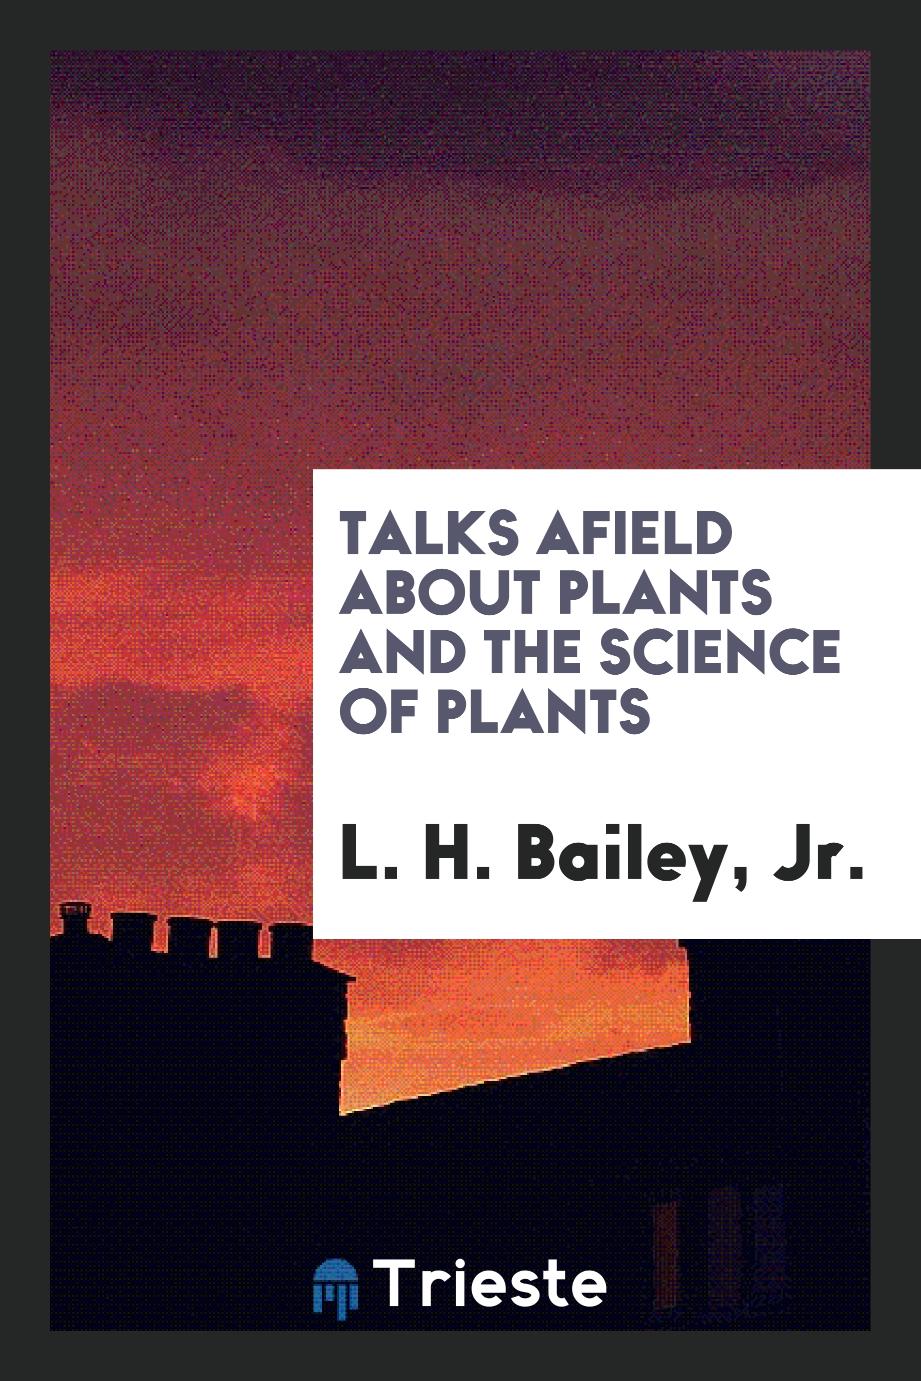 Talks afield about plants and the science of plants